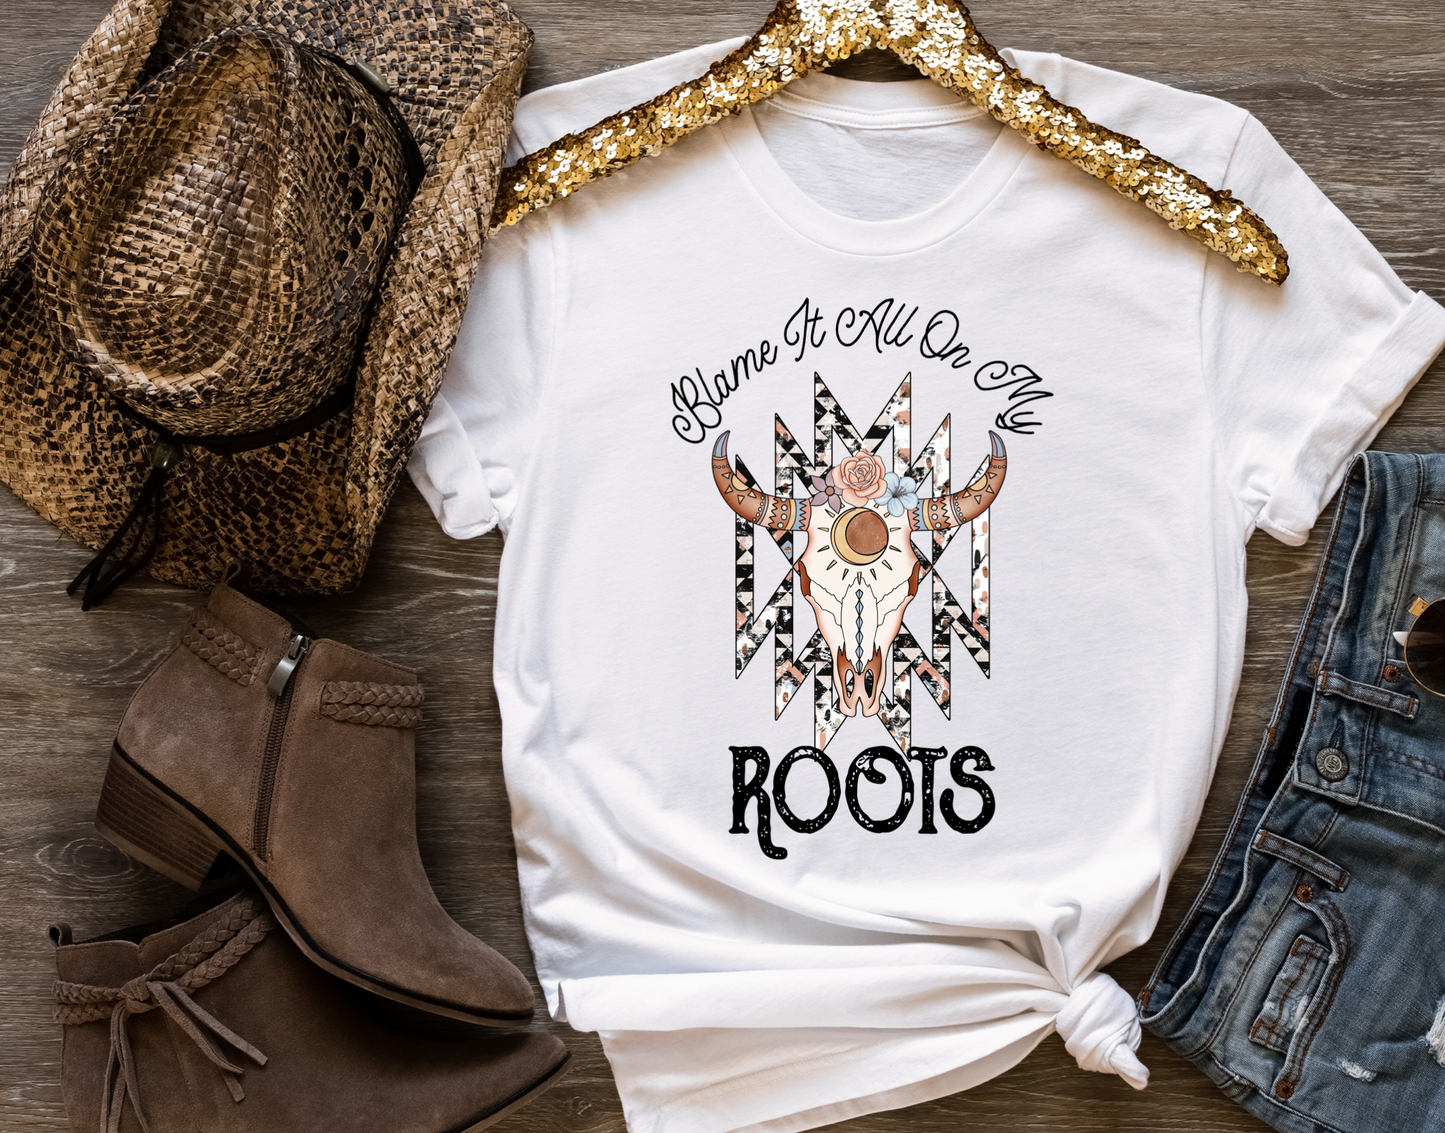 Blame it all on my roots Tee